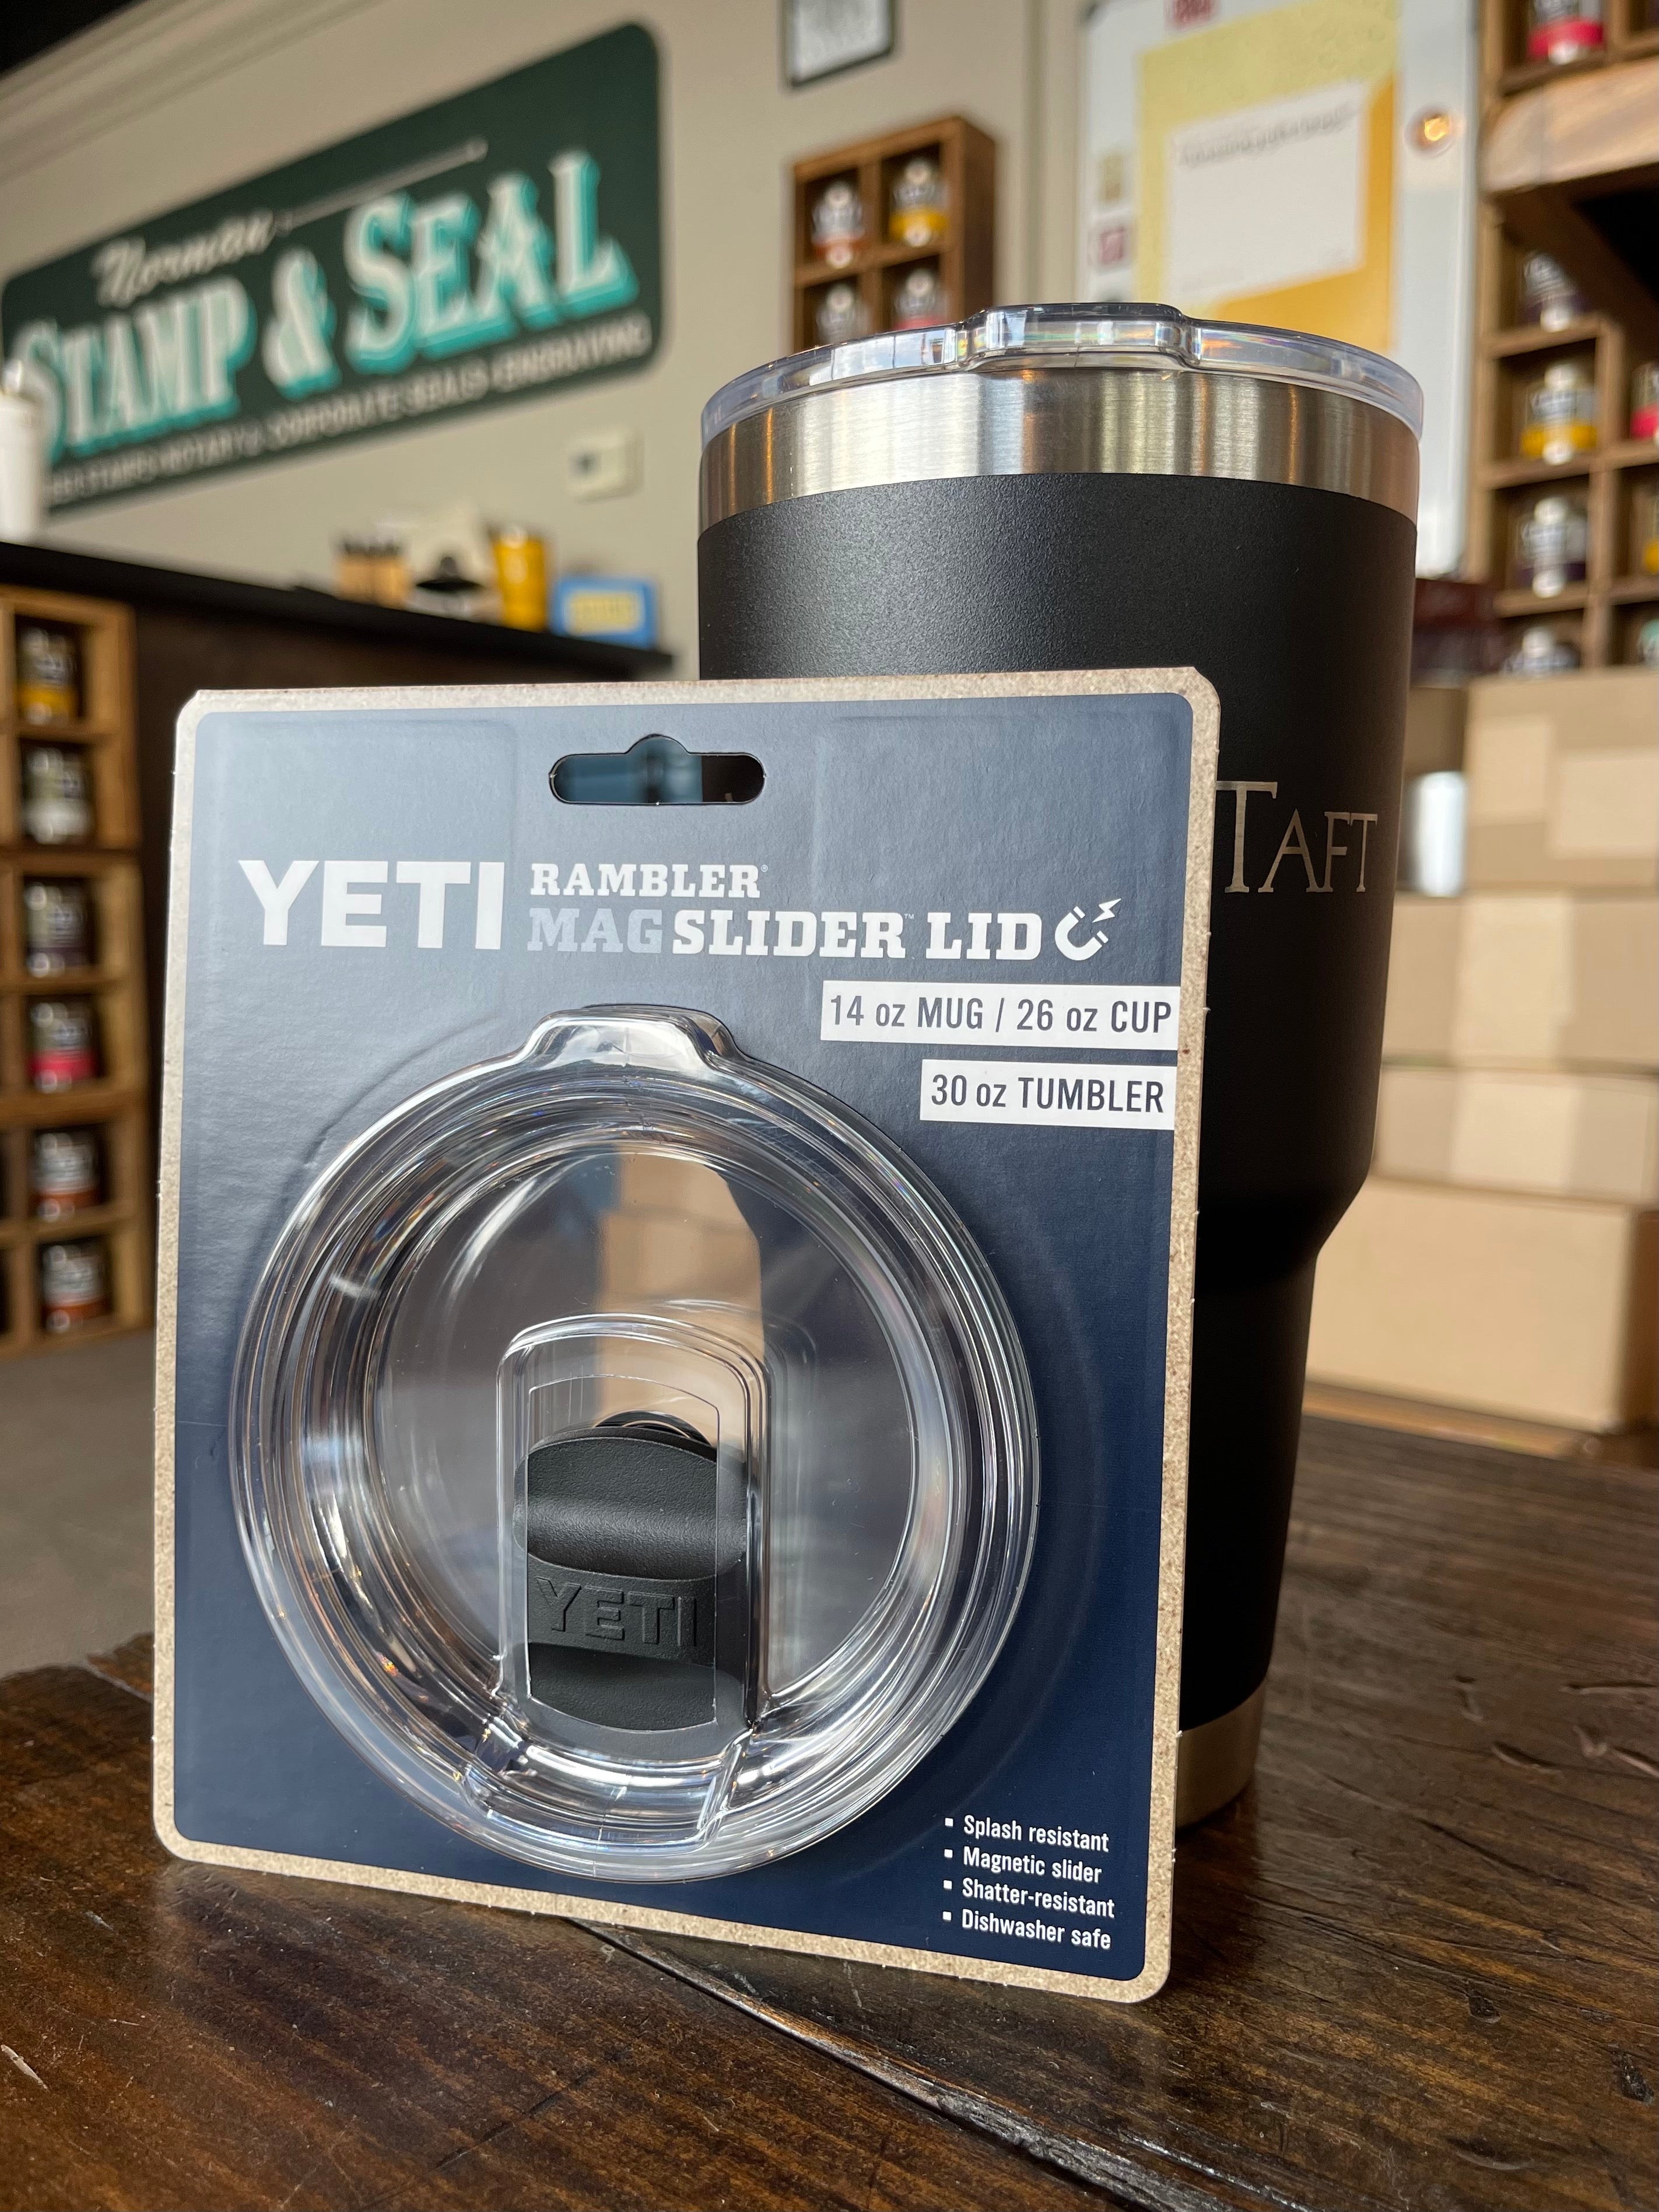 I seen a lot of people upset at the mag slide lid on the yeti with the  handle (the screw on lid). Just an FYI the OG magslider for 30 Oz fits